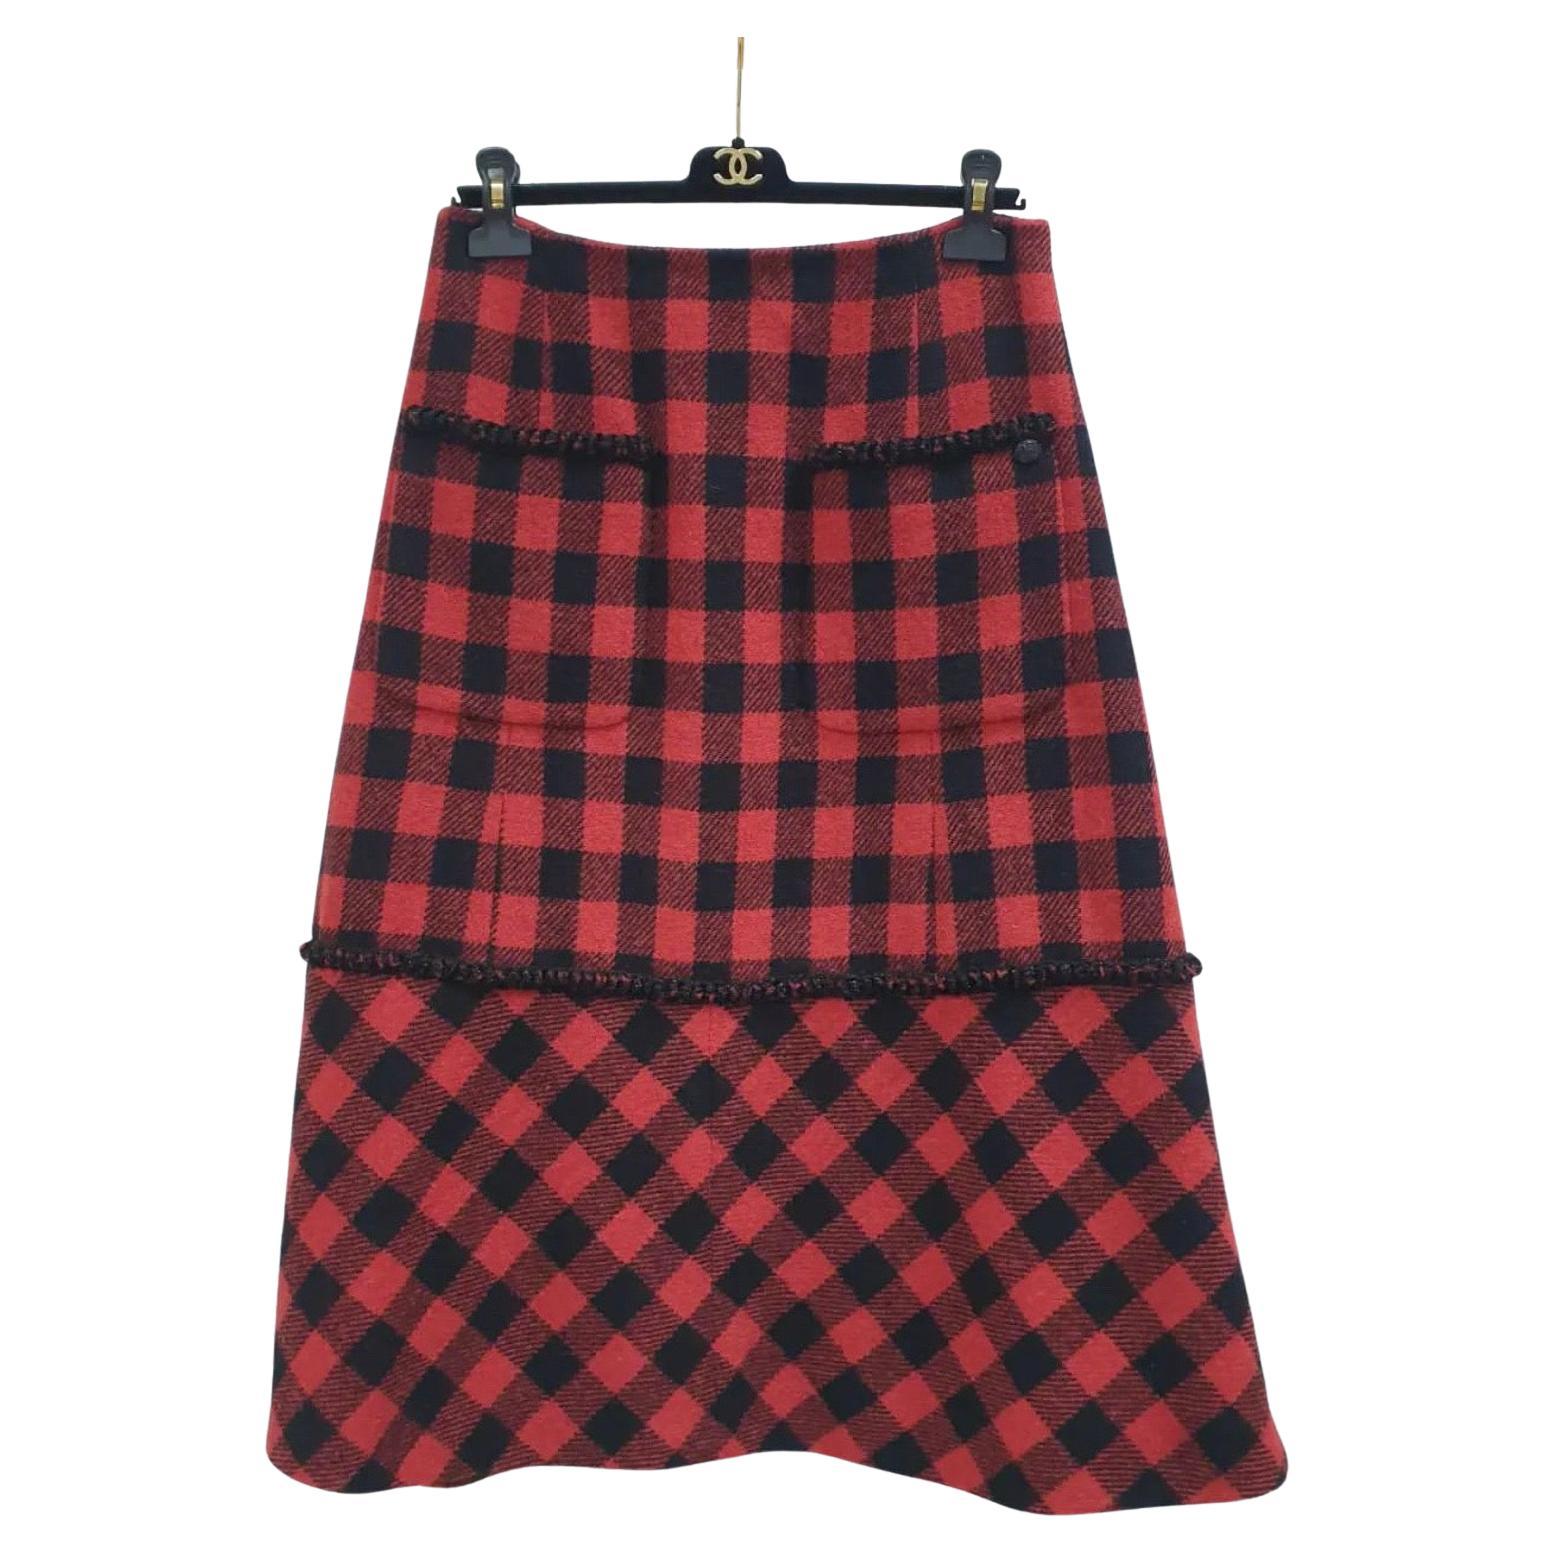 Chanel Wool Red Black Checkered Skirt